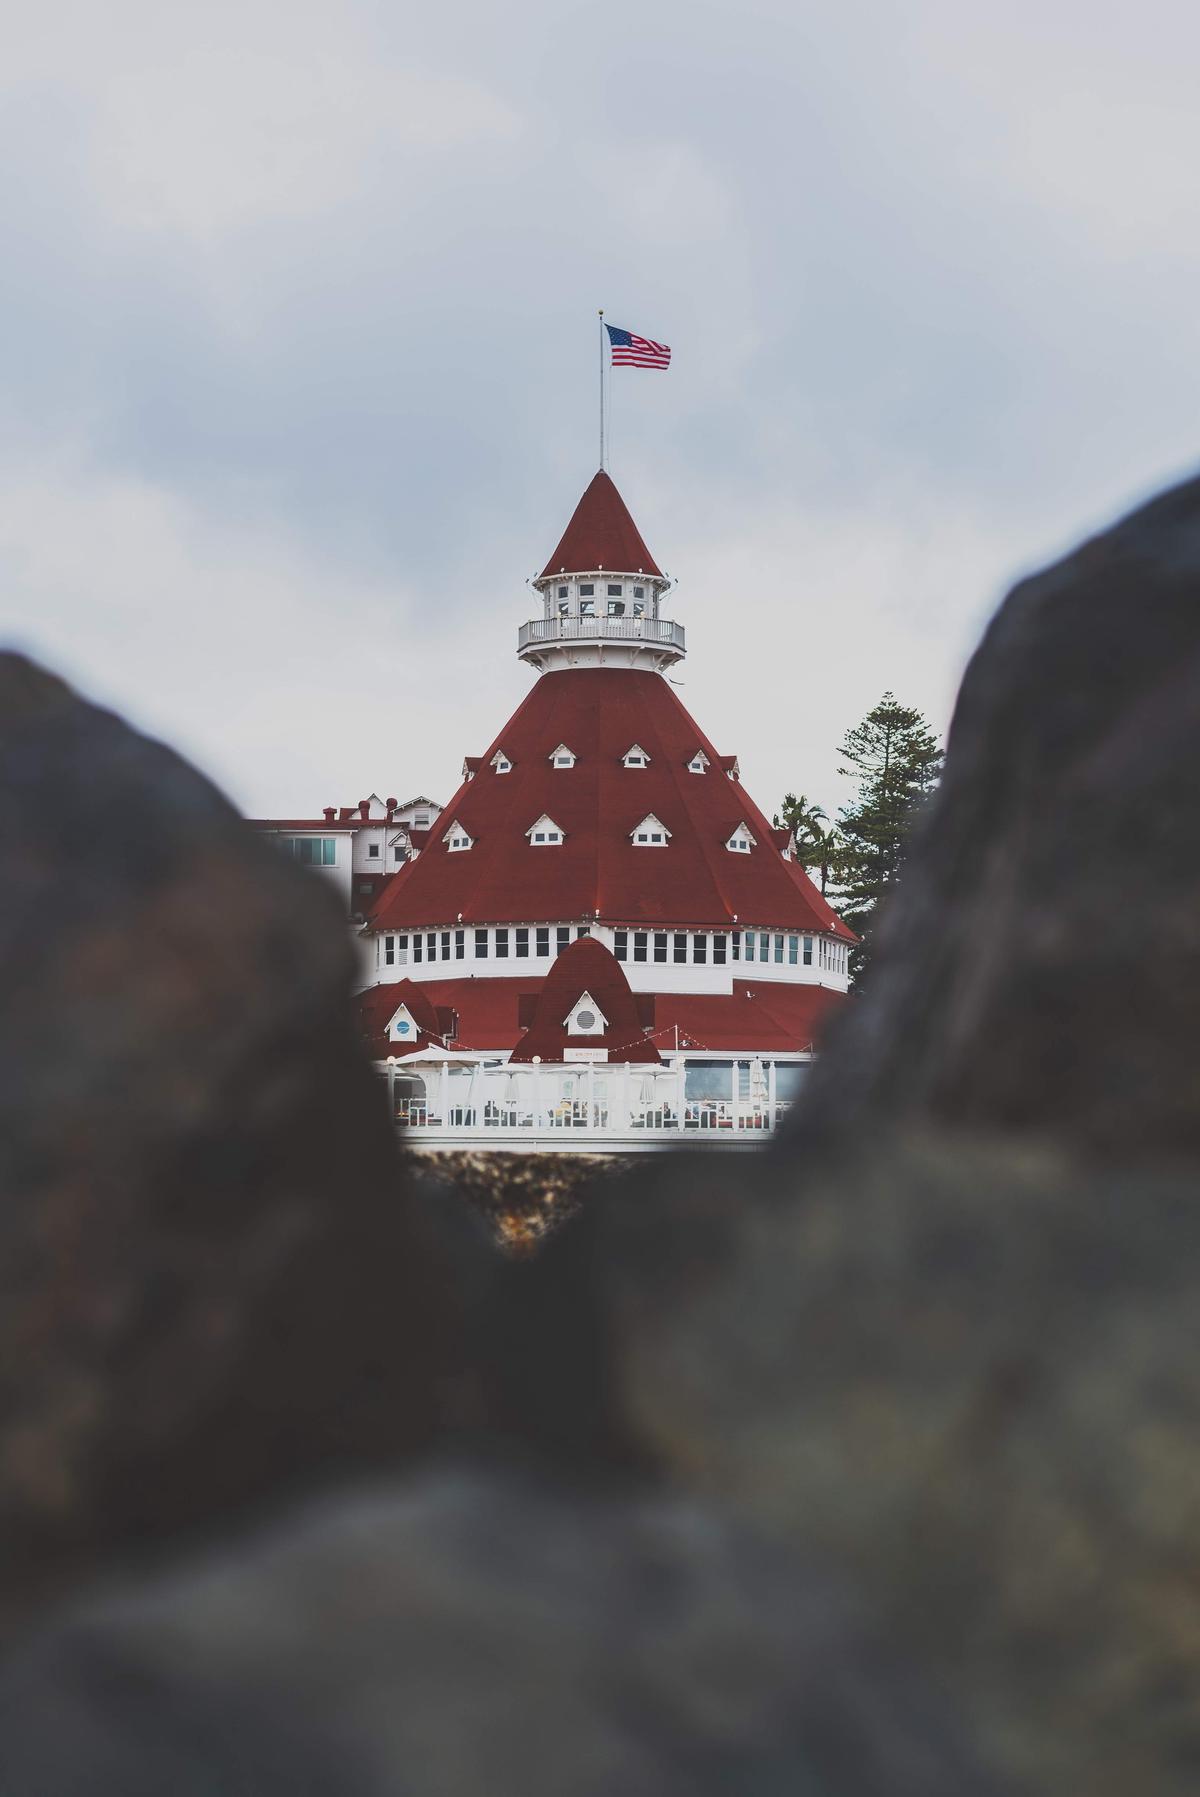 The iconic Hotel Del Coronado sits on the beach with loungers and umbrellas scattered on the sand, with the clear blue ocean in the background.